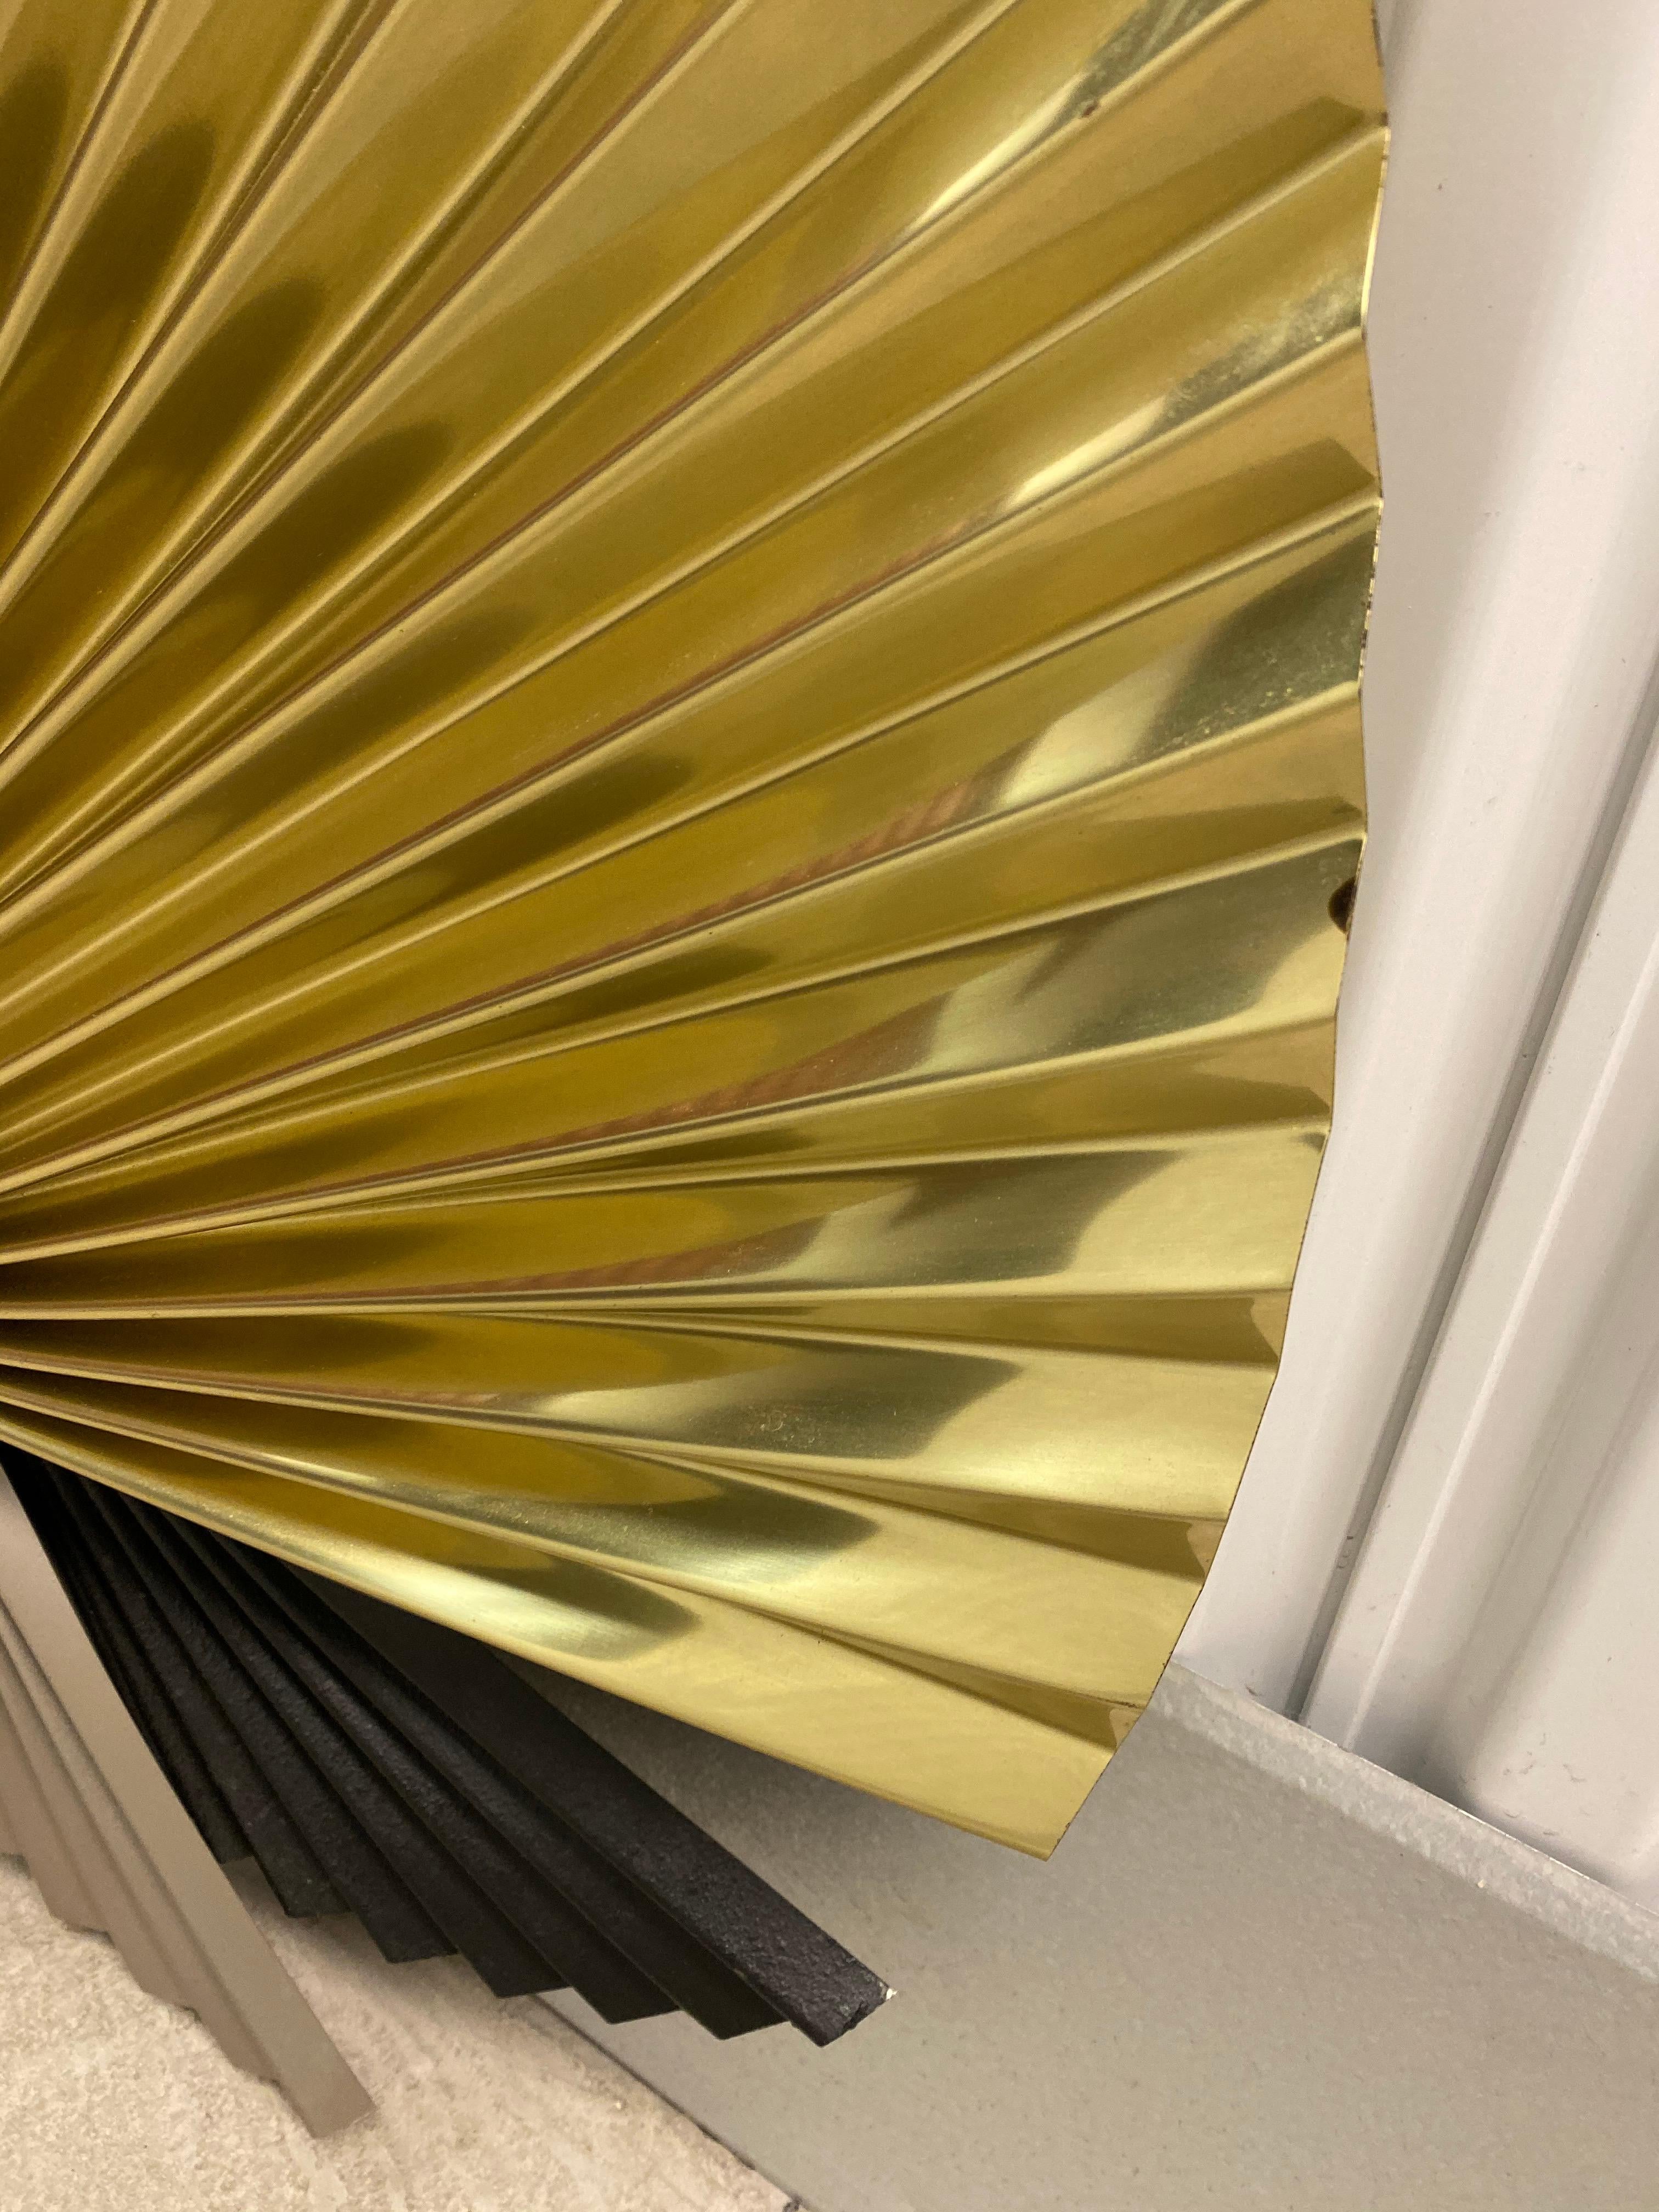 Signed and dated Curtis Jere pleated fan wall sculpture. Great condition with minimal wear and tear on metal. Excellent folded paper look to fan pieces. Can be oriented in different positions on the wall. Brass , gunmetal and powder-coated pleated